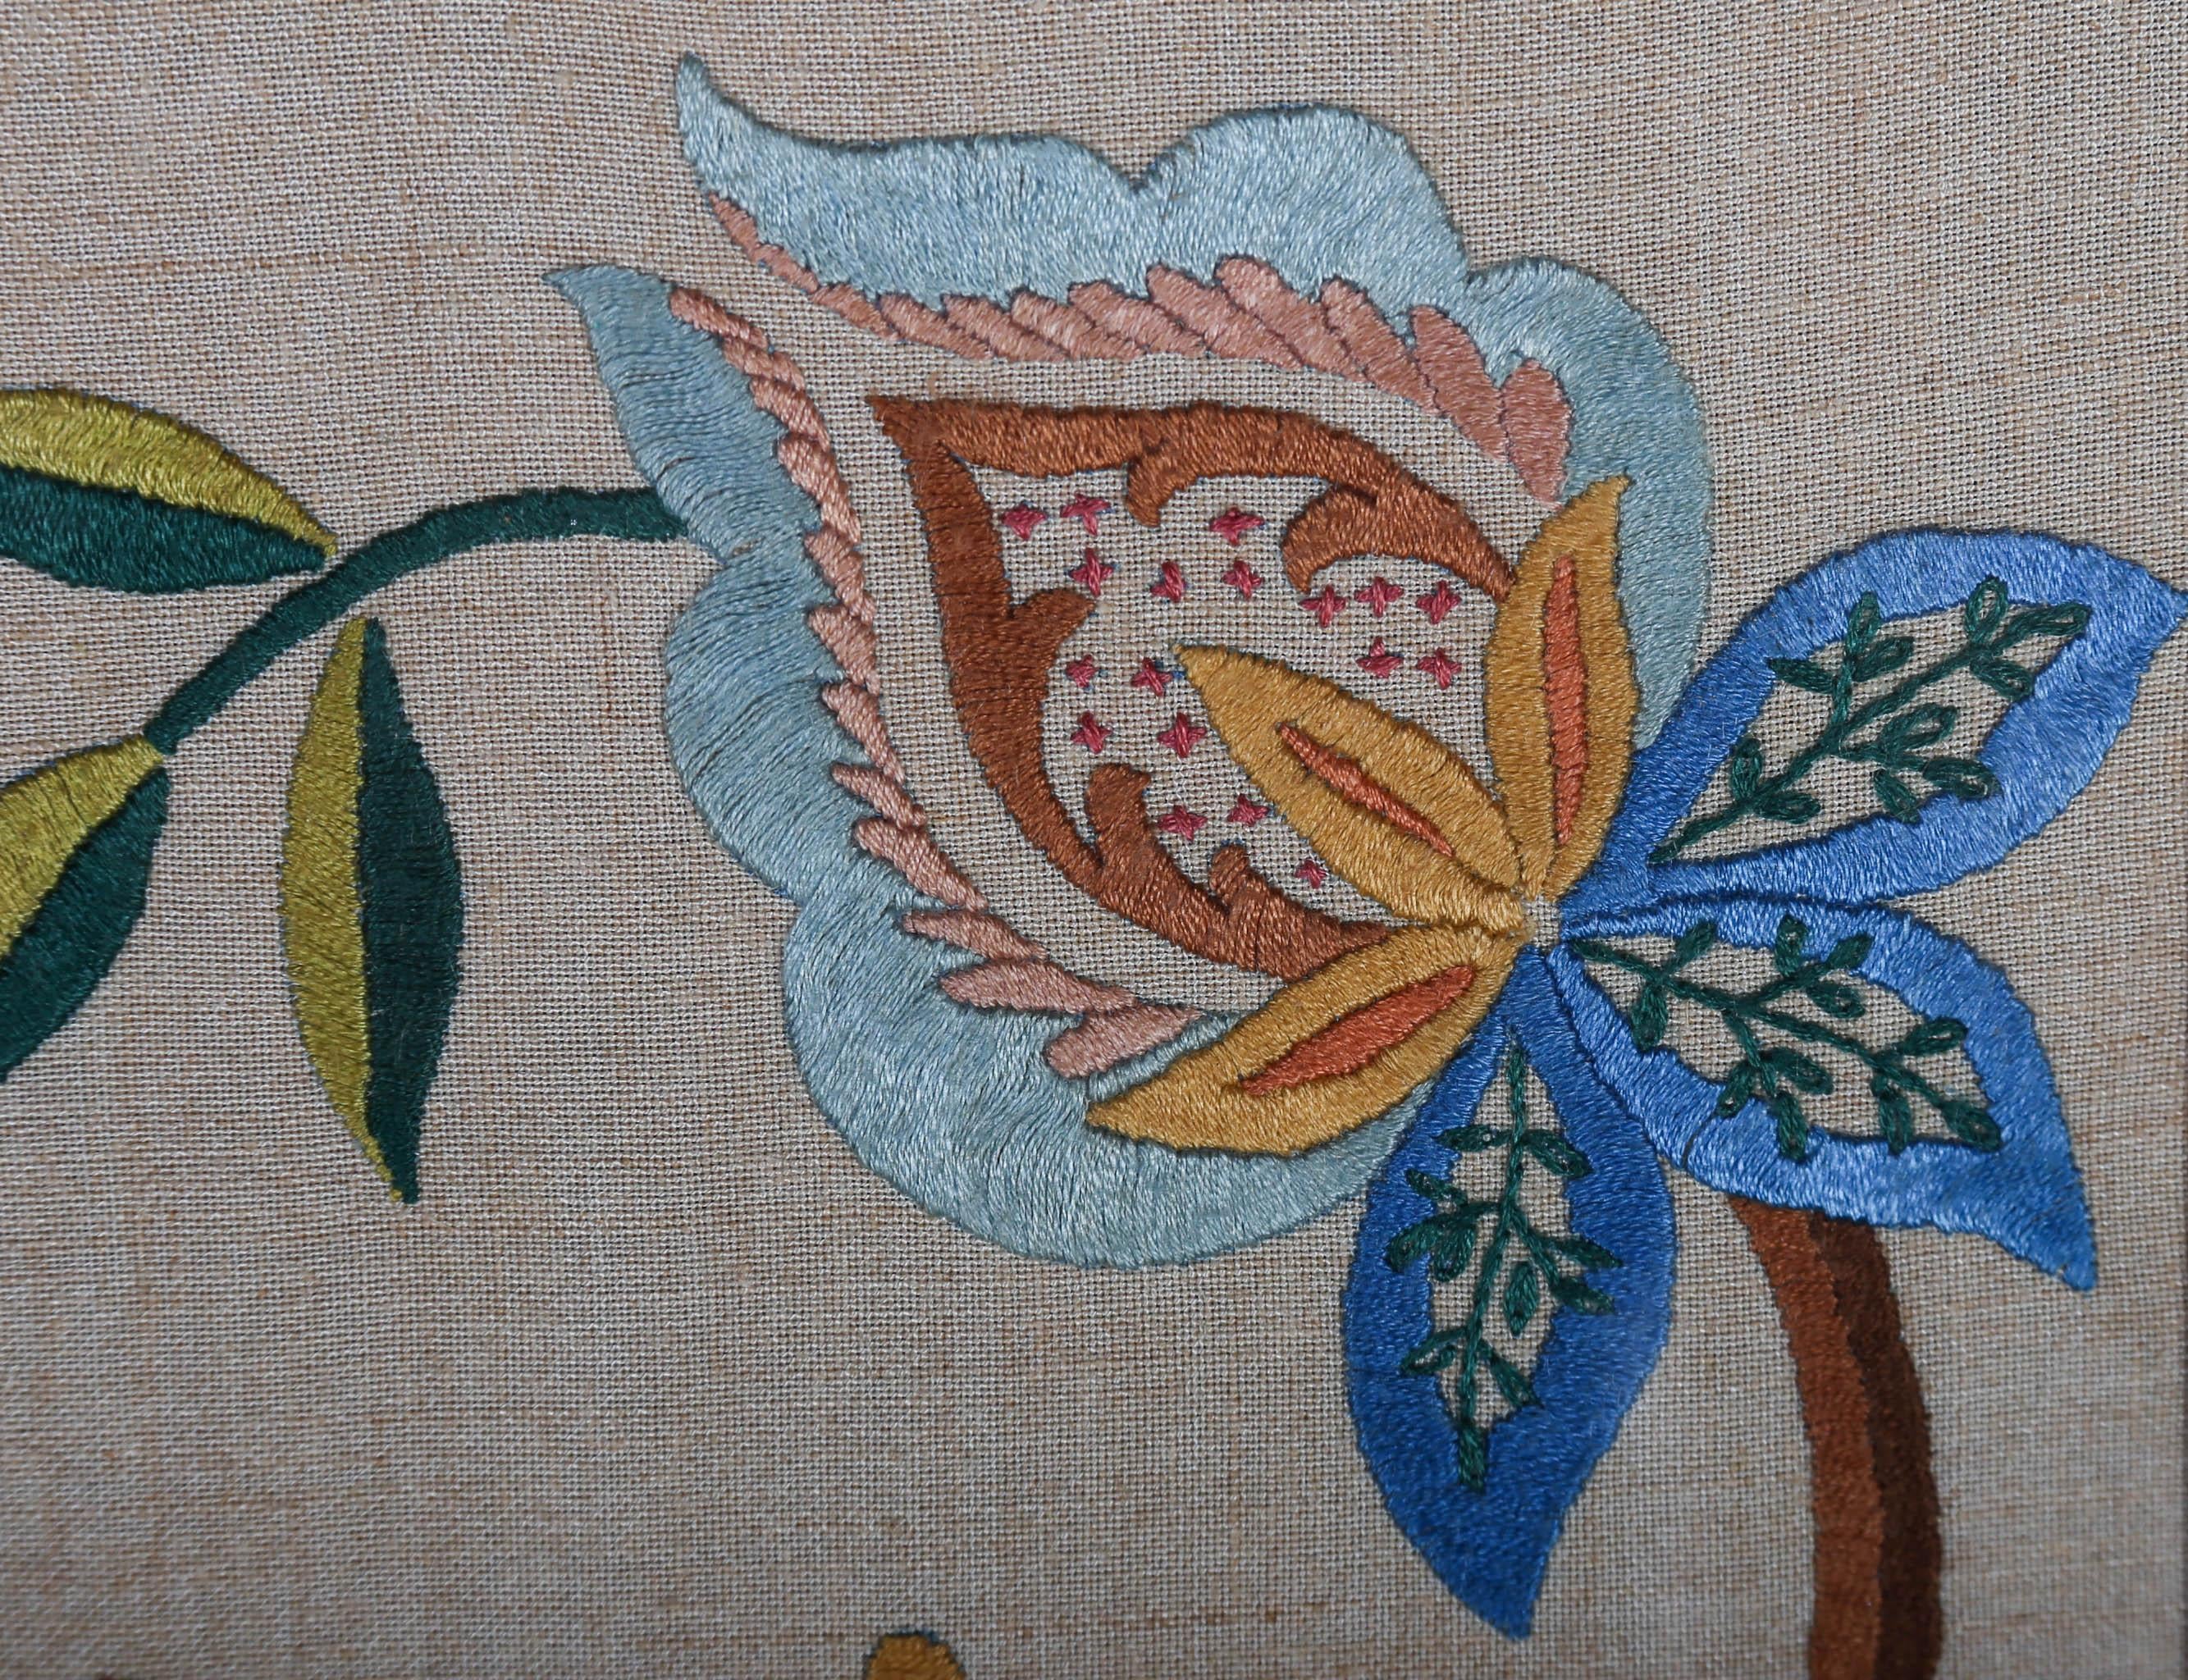 Curvaceous art nouveau flowers have been carefully embroidered with colour threat to complete is lavish botanical motif. A mix of stitching patterns have been used by the artist to bring to life each floral element. Unsigned. The sample has been